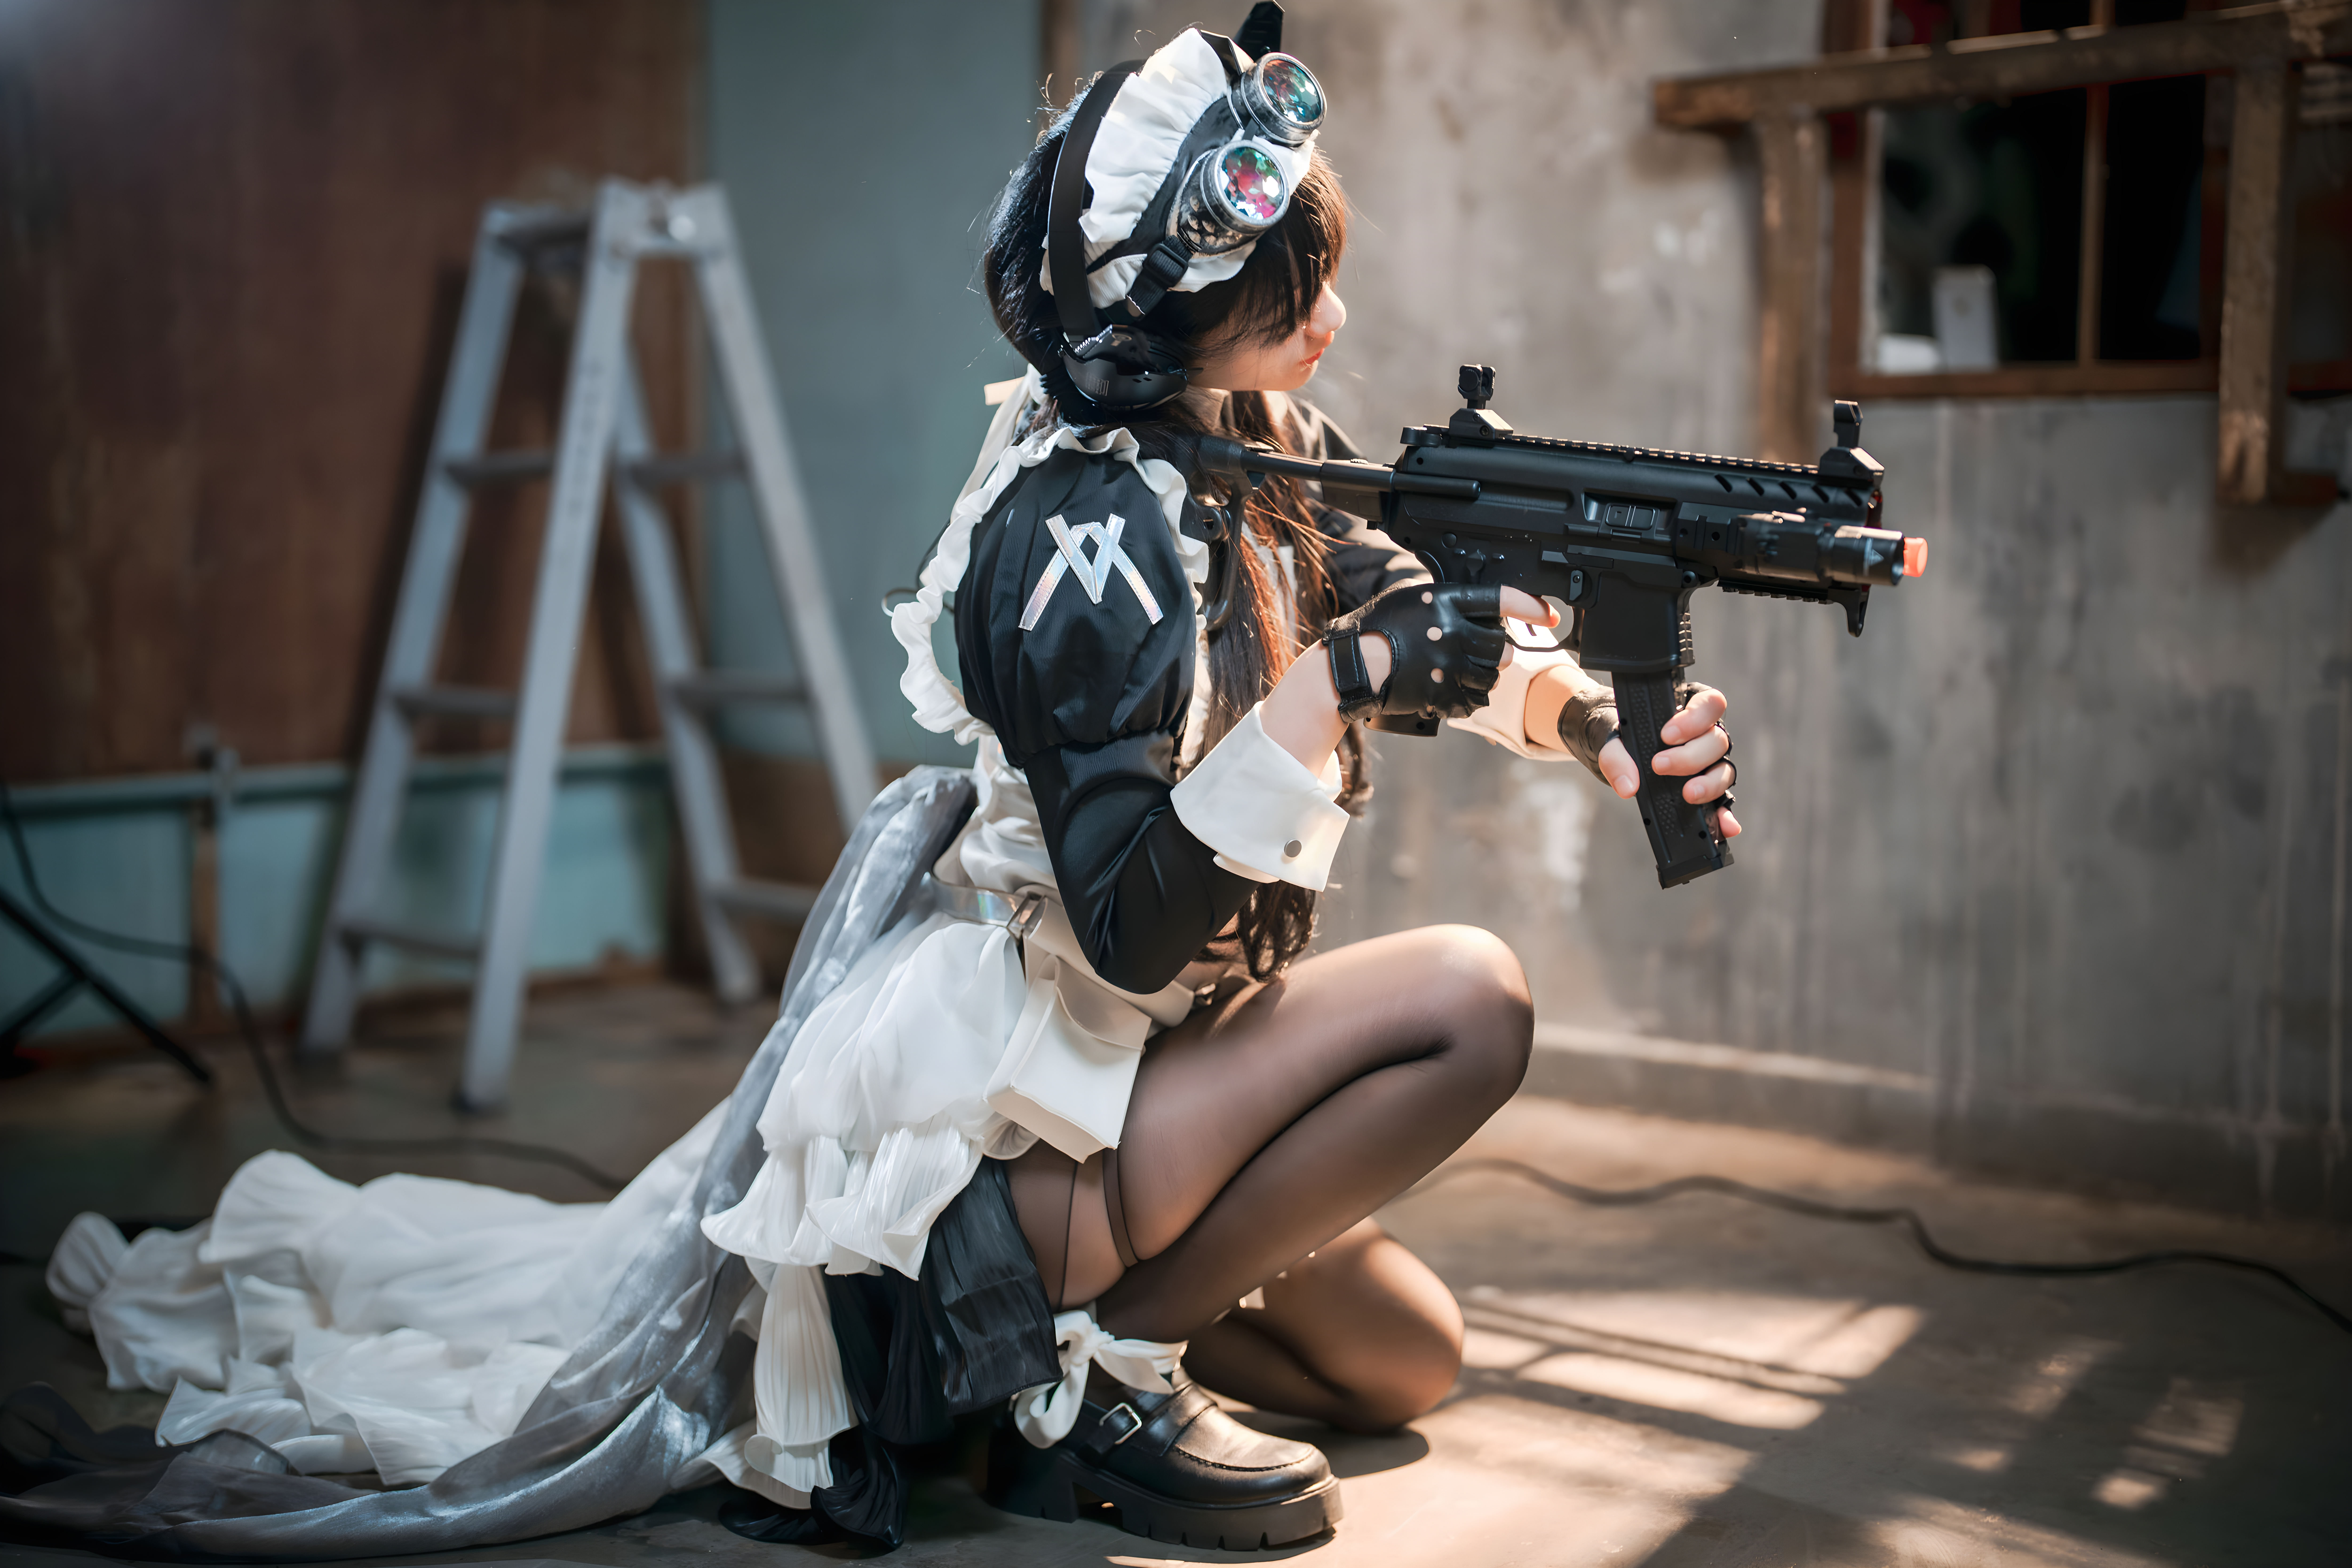 Maid Outfit Mpx Toy Gun Goggles Leather Gloves Asian Cosplay Women 10800x7200